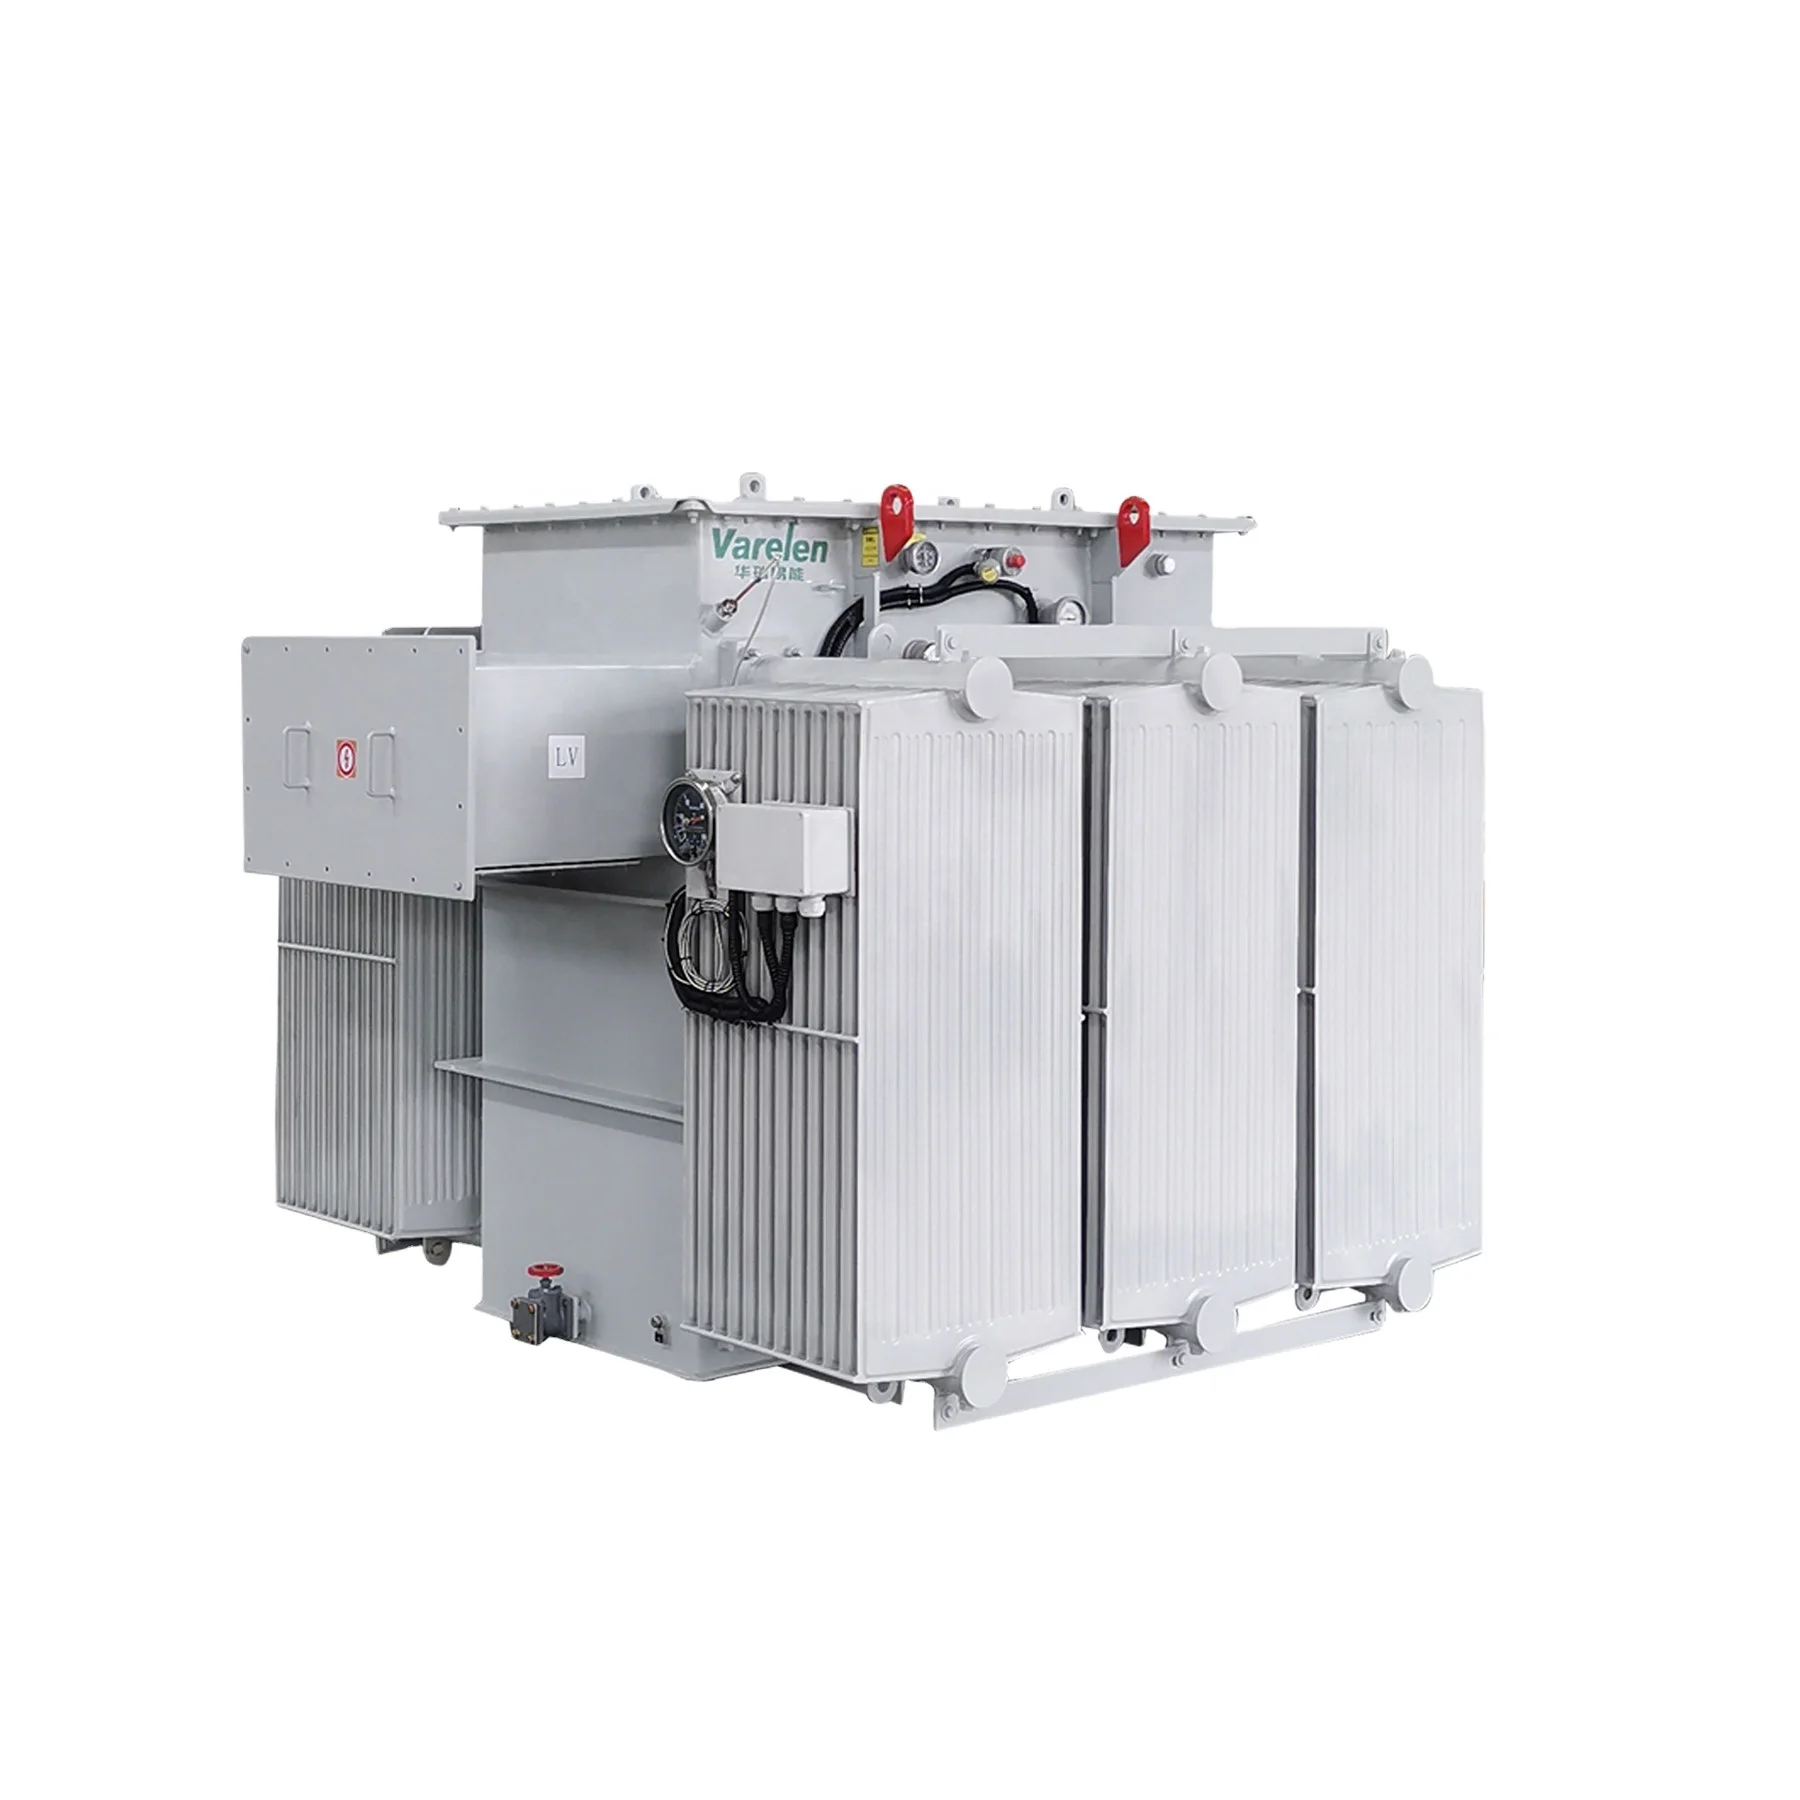 S13 2000kva 3 phase  Oil immersed type distribution Transformers